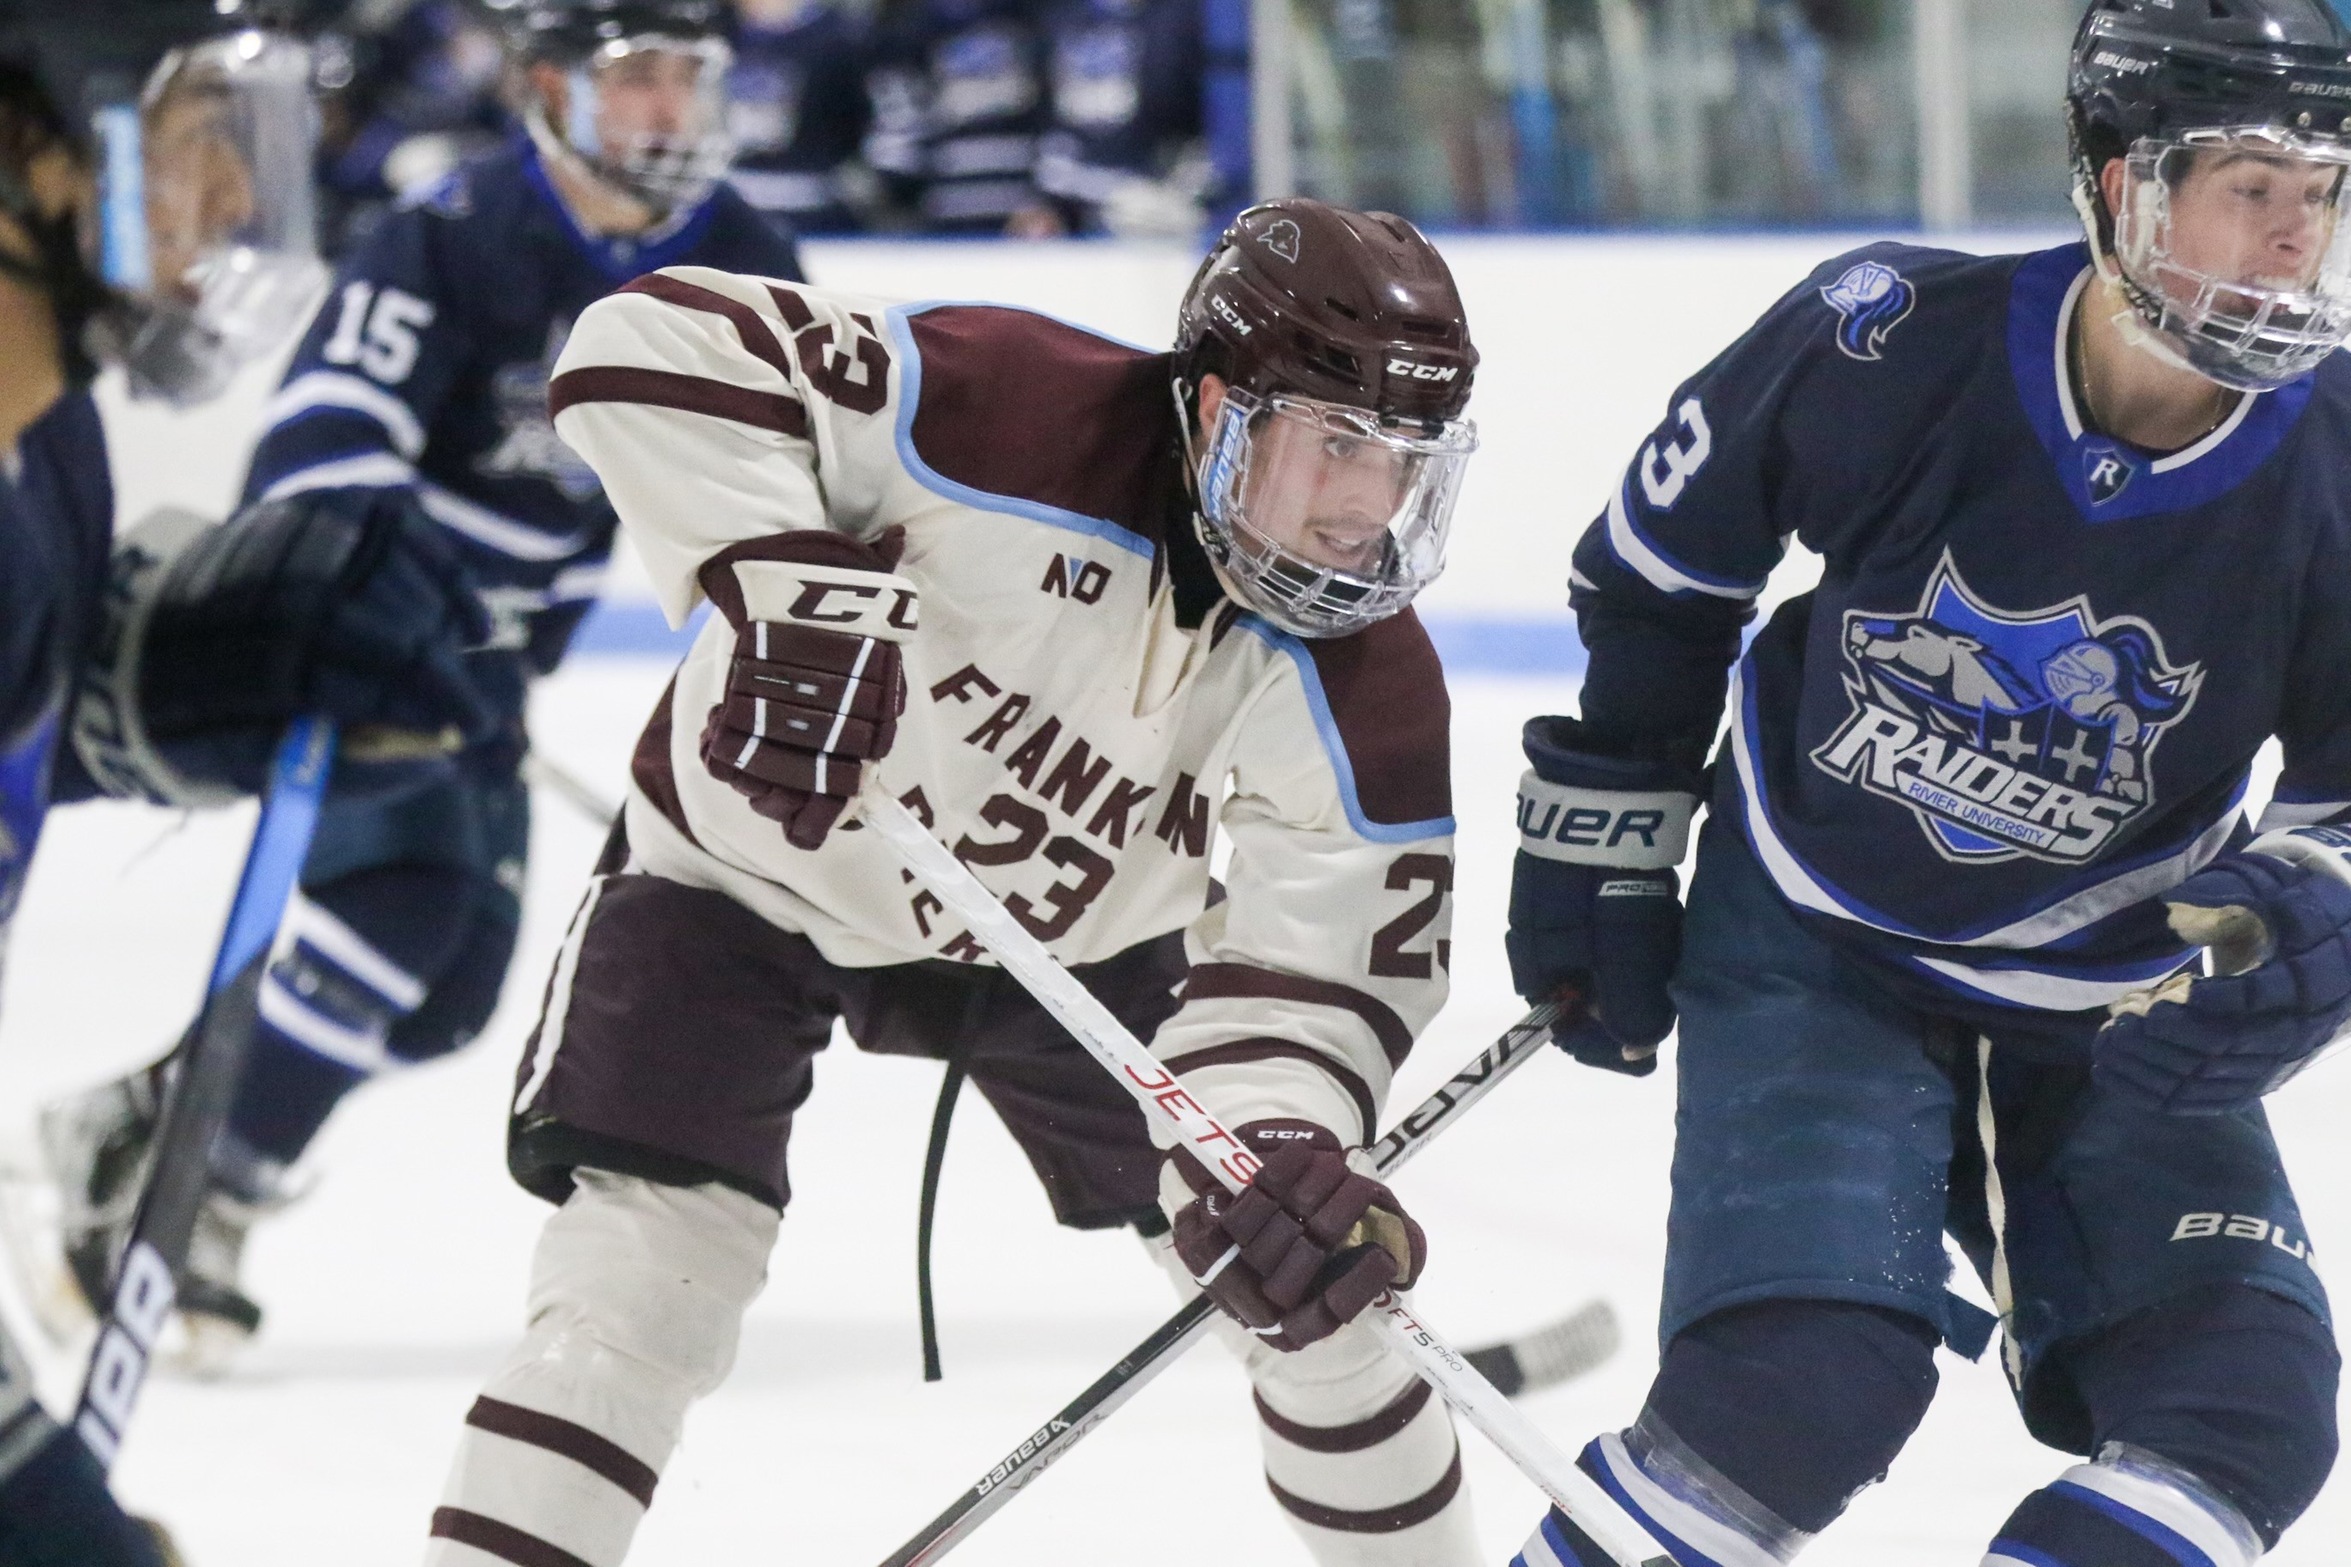 Men's Ice Hockey: Ravens drop hard-fought game to Rivier, 4-2.